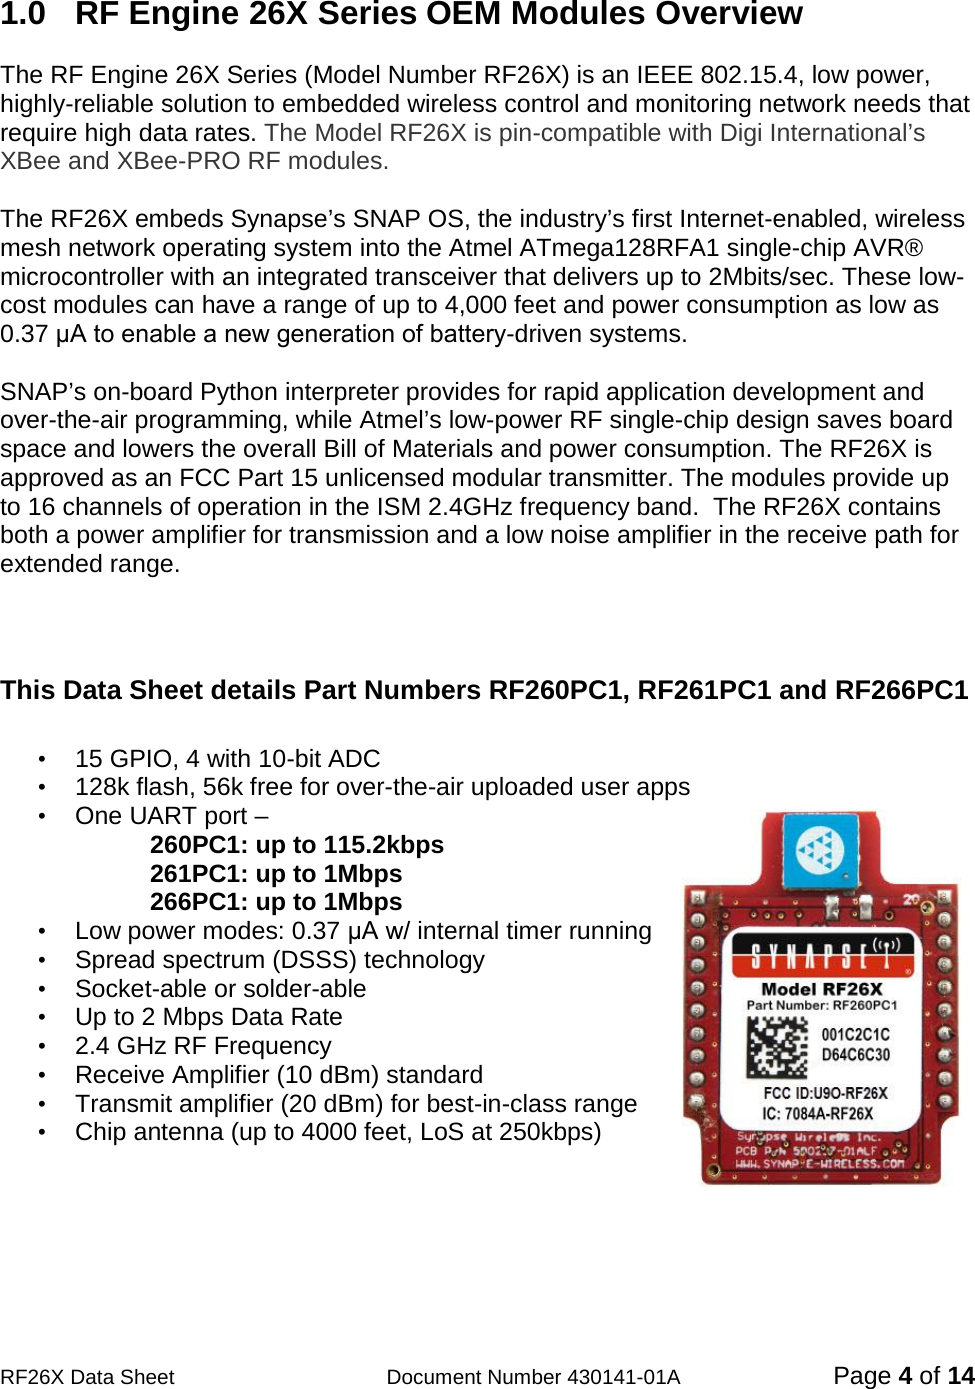                                            RF26X Data Sheet                  Document Number 430141-01A  Page 4 of 14  1.0  RF Engine 26X Series OEM Modules Overview  The RF Engine 26X Series (Model Number RF26X) is an IEEE 802.15.4, low power, highly-reliable solution to embedded wireless control and monitoring network needs that require high data rates. The Model RF26X is pin-compatible with Digi International’s XBee and XBee-PRO RF modules.  The RF26X embeds Synapse’s SNAP OS, the industry’s first Internet-enabled, wireless mesh network operating system into the Atmel ATmega128RFA1 single-chip AVR® microcontroller with an integrated transceiver that delivers up to 2Mbits/sec. These low-cost modules can have a range of up to 4,000 feet and power consumption as low as 0.37 μA to enable a new generation of battery-driven systems.  SNAP’s on-board Python interpreter provides for rapid application development and over-the-air programming, while Atmel’s low-power RF single-chip design saves board space and lowers the overall Bill of Materials and power consumption. The RF26X is approved as an FCC Part 15 unlicensed modular transmitter. The modules provide up to 16 channels of operation in the ISM 2.4GHz frequency band.  The RF26X contains both a power amplifier for transmission and a low noise amplifier in the receive path for extended range.    This Data Sheet details Part Numbers RF260PC1, RF261PC1 and RF266PC1  • 15 GPIO, 4 with 10-bit ADC                                • 128k flash, 56k free for over-the-air uploaded user apps • One UART port –  260PC1: up to 115.2kbps 261PC1: up to 1Mbps 266PC1: up to 1Mbps   • Low power modes: 0.37 μA w/ internal timer running • Spread spectrum (DSSS) technology  •  Socket-able or solder-able  • Up to 2 Mbps Data Rate • 2.4 GHz RF Frequency • Receive Amplifier (10 dBm) standard • Transmit amplifier (20 dBm) for best-in-class range • Chip antenna (up to 4000 feet, LoS at 250kbps)  